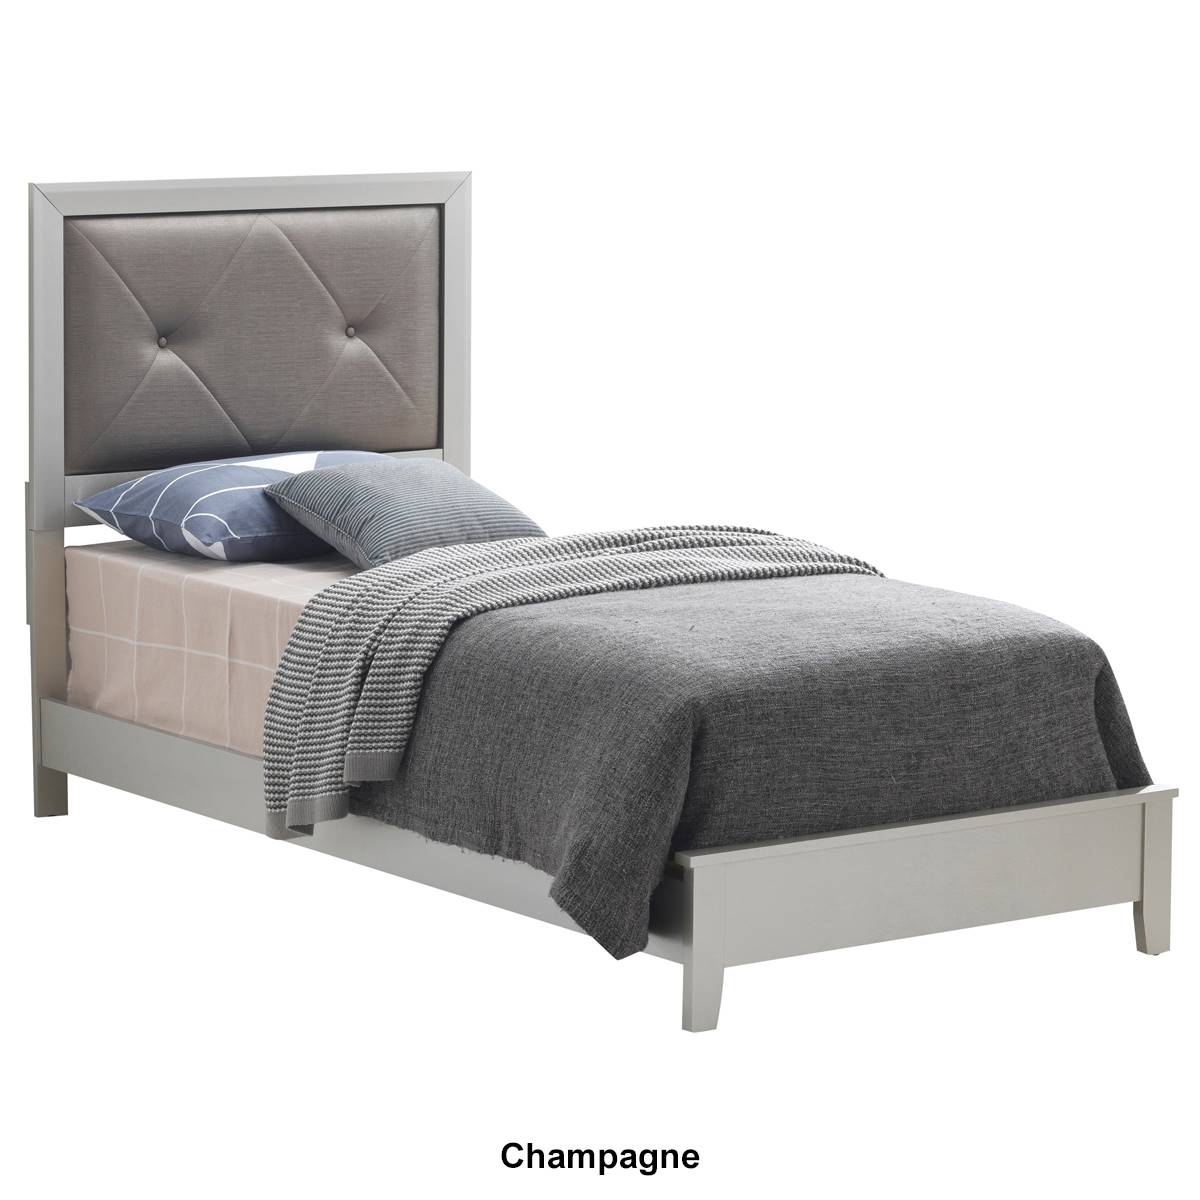 Passion Furniture Primo Tufted Upholstered Panel Bed Frame - Twin